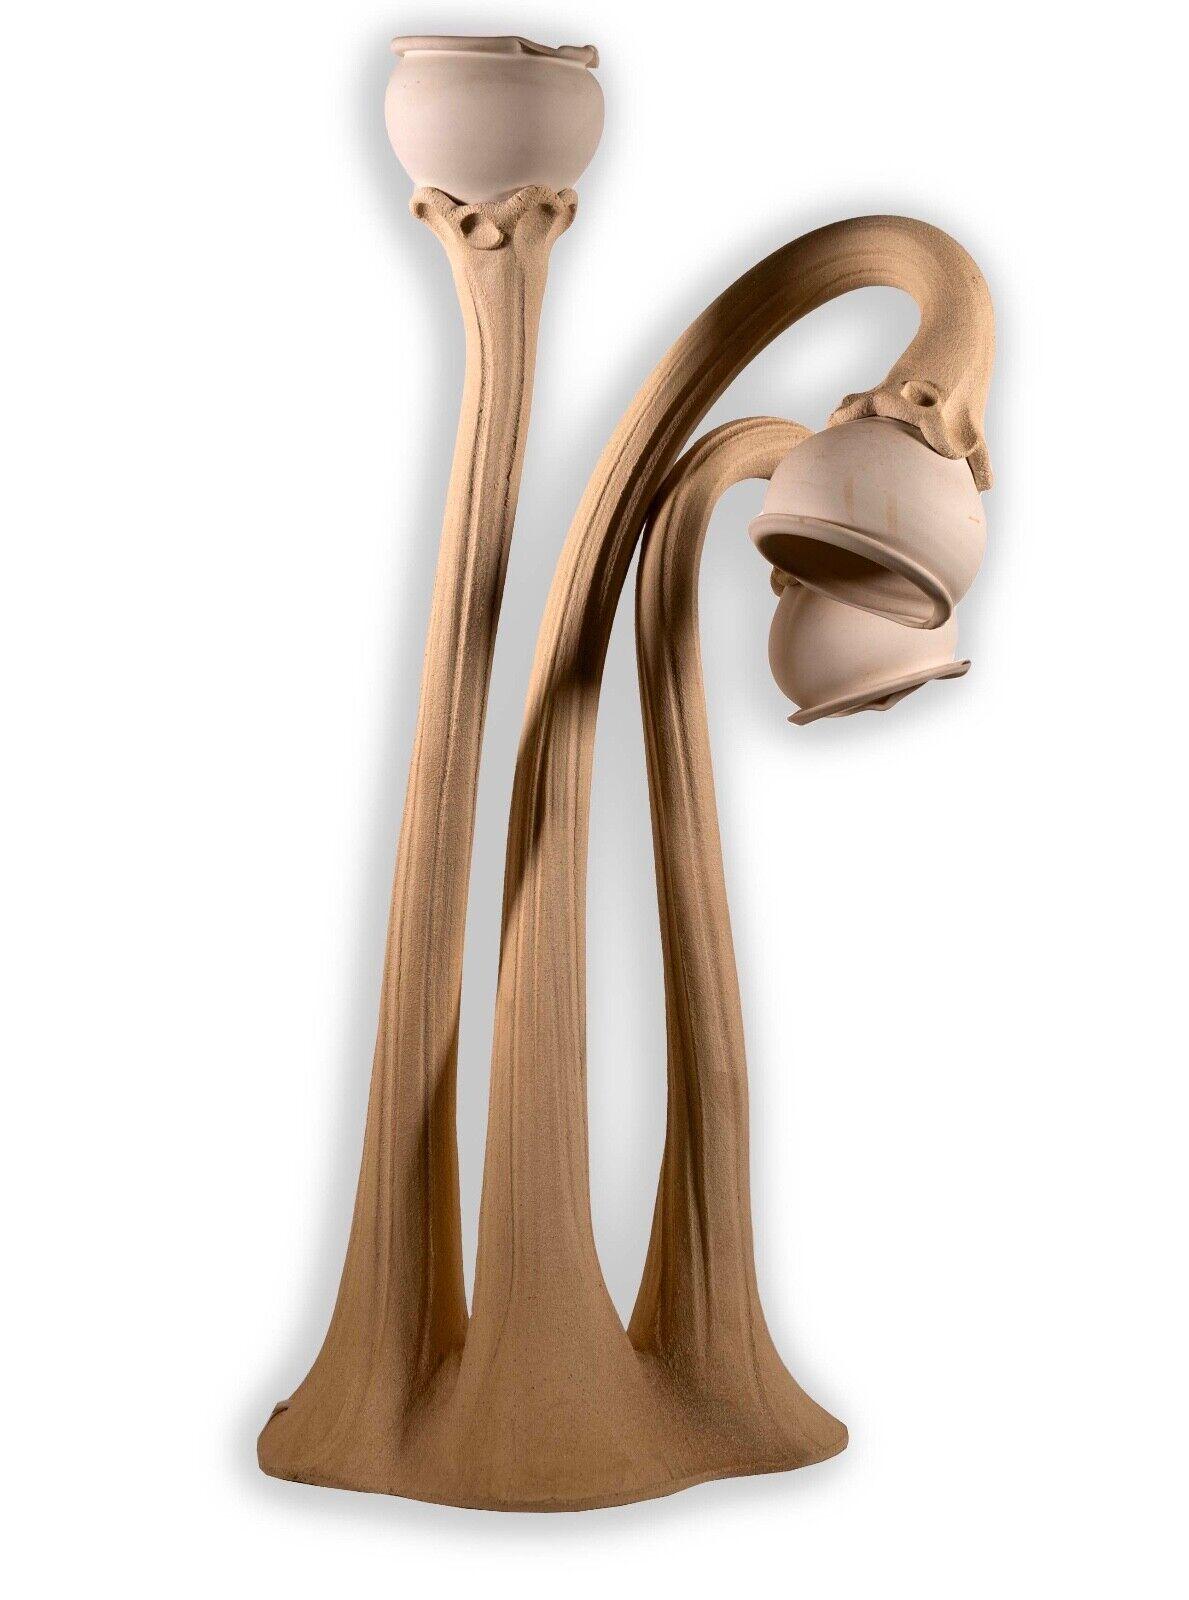 This Art Nouveau-inspired ceramic pottery table lamp by Doug Blum is a stunning fusion of form and function, featuring a captivating design of calla lilies in the Art Nouveau tradition. The lamp is not only a functional lighting piece but also a